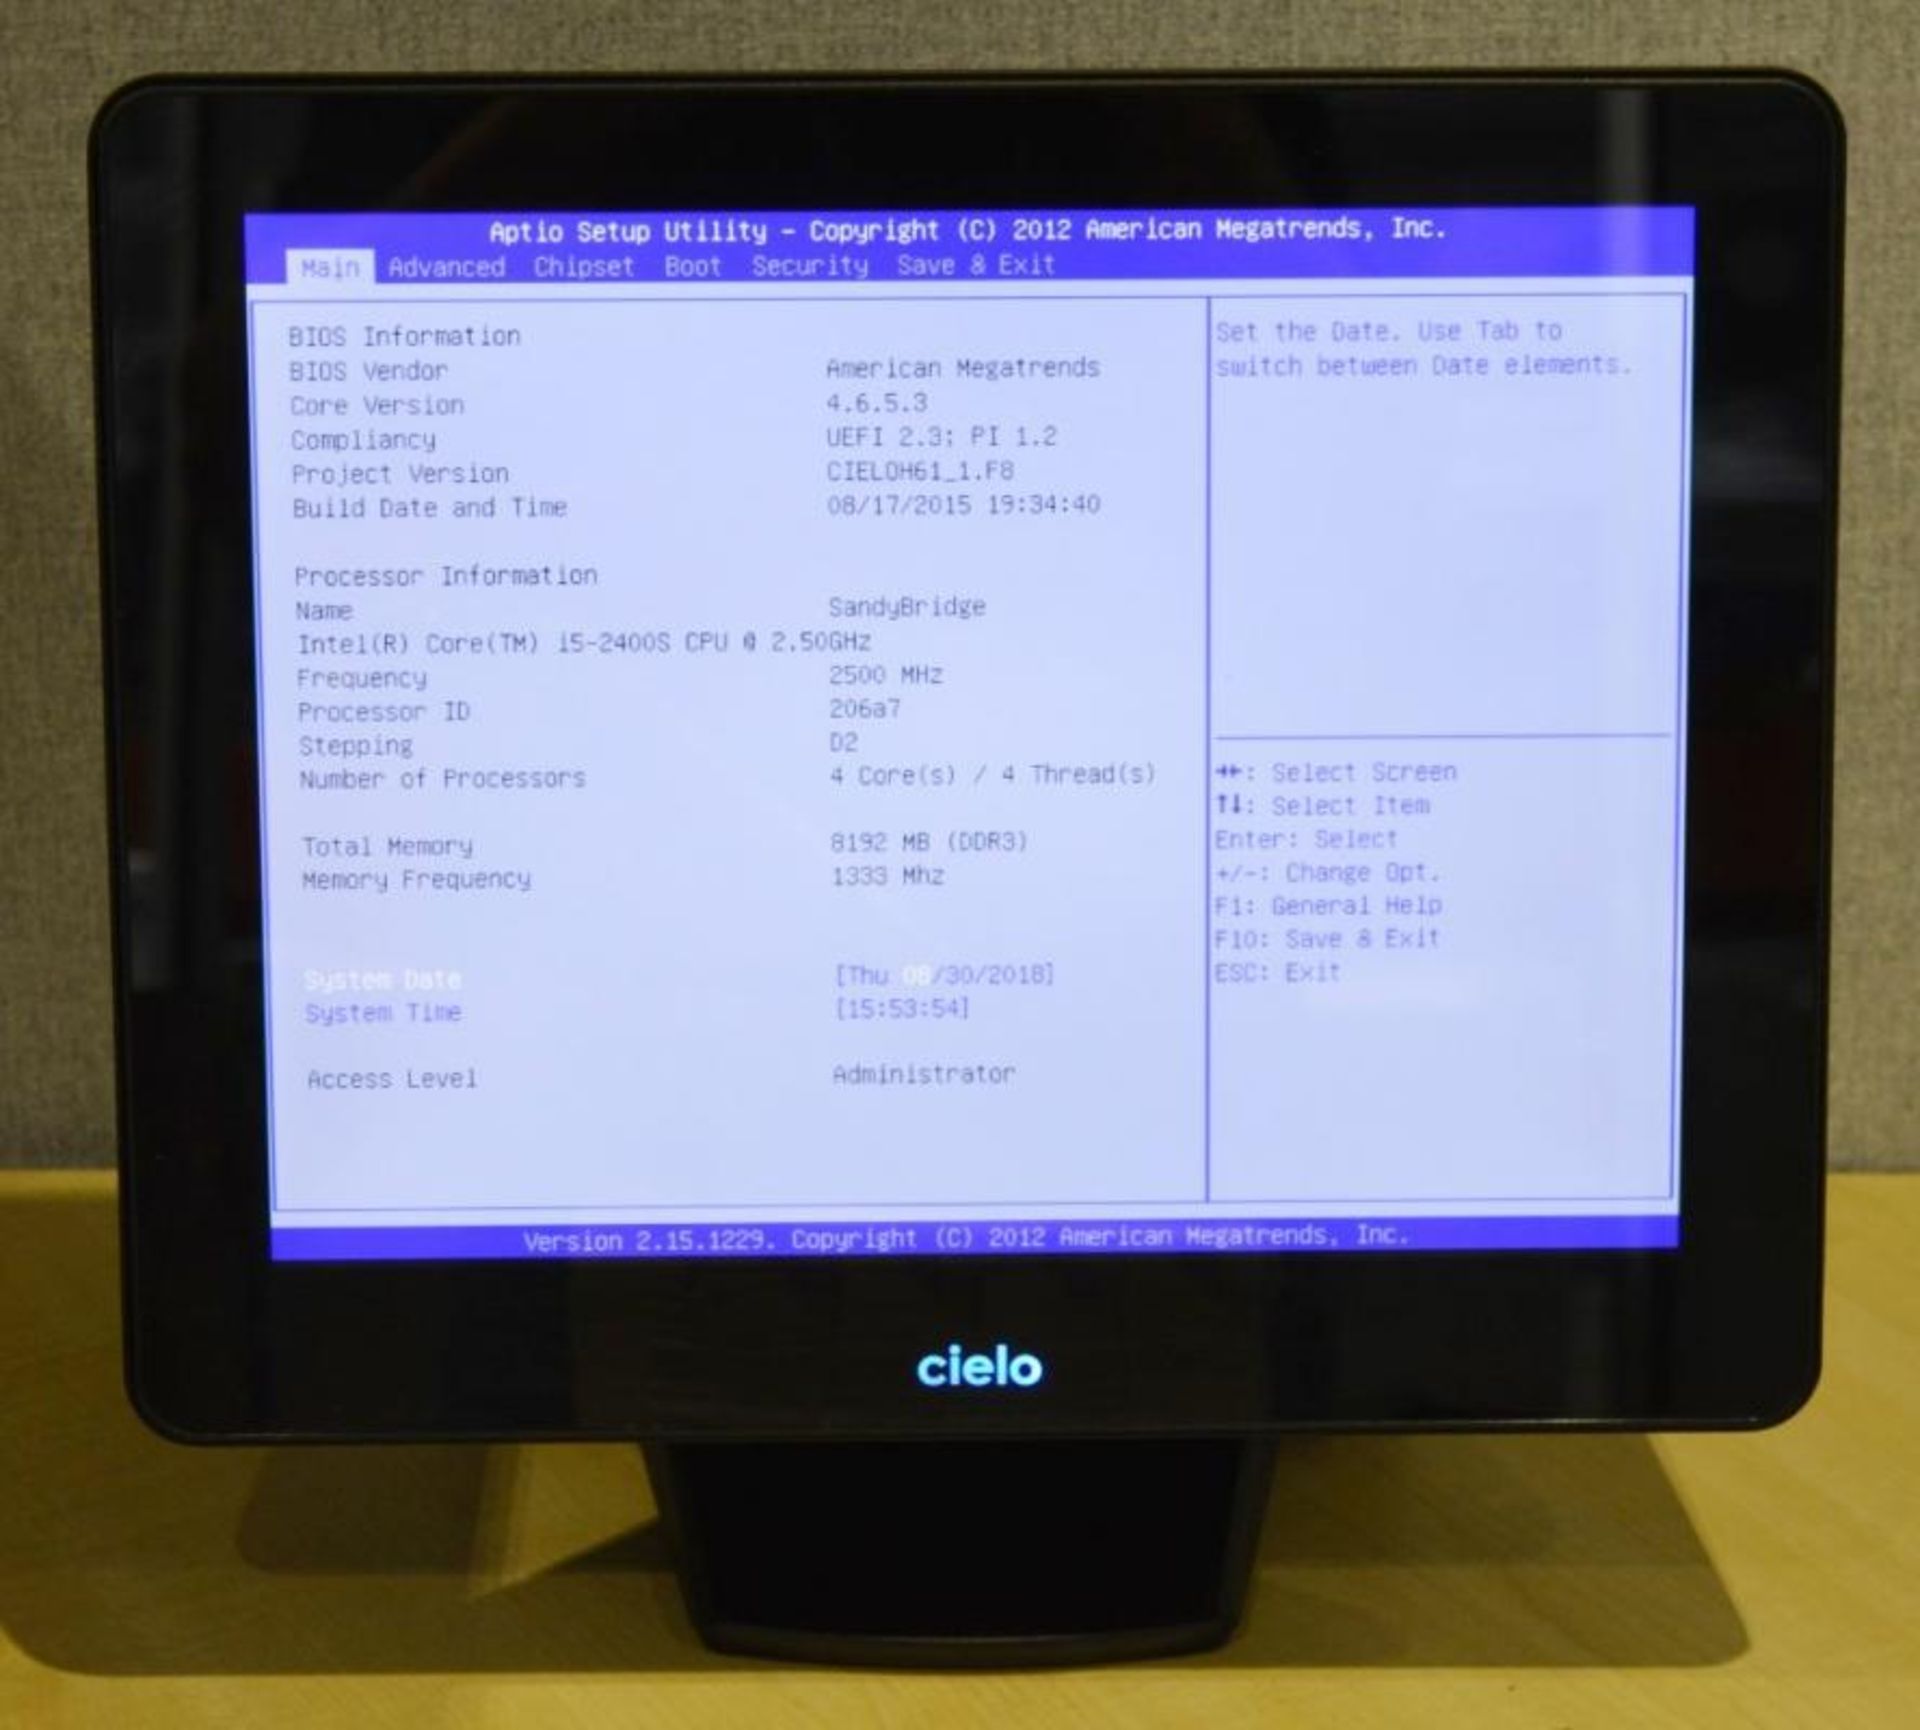 1 x Cielo AP-3615 All in One Desktop Computer POS System - Features Include 15 Inch Touch Screen, - Image 7 of 12